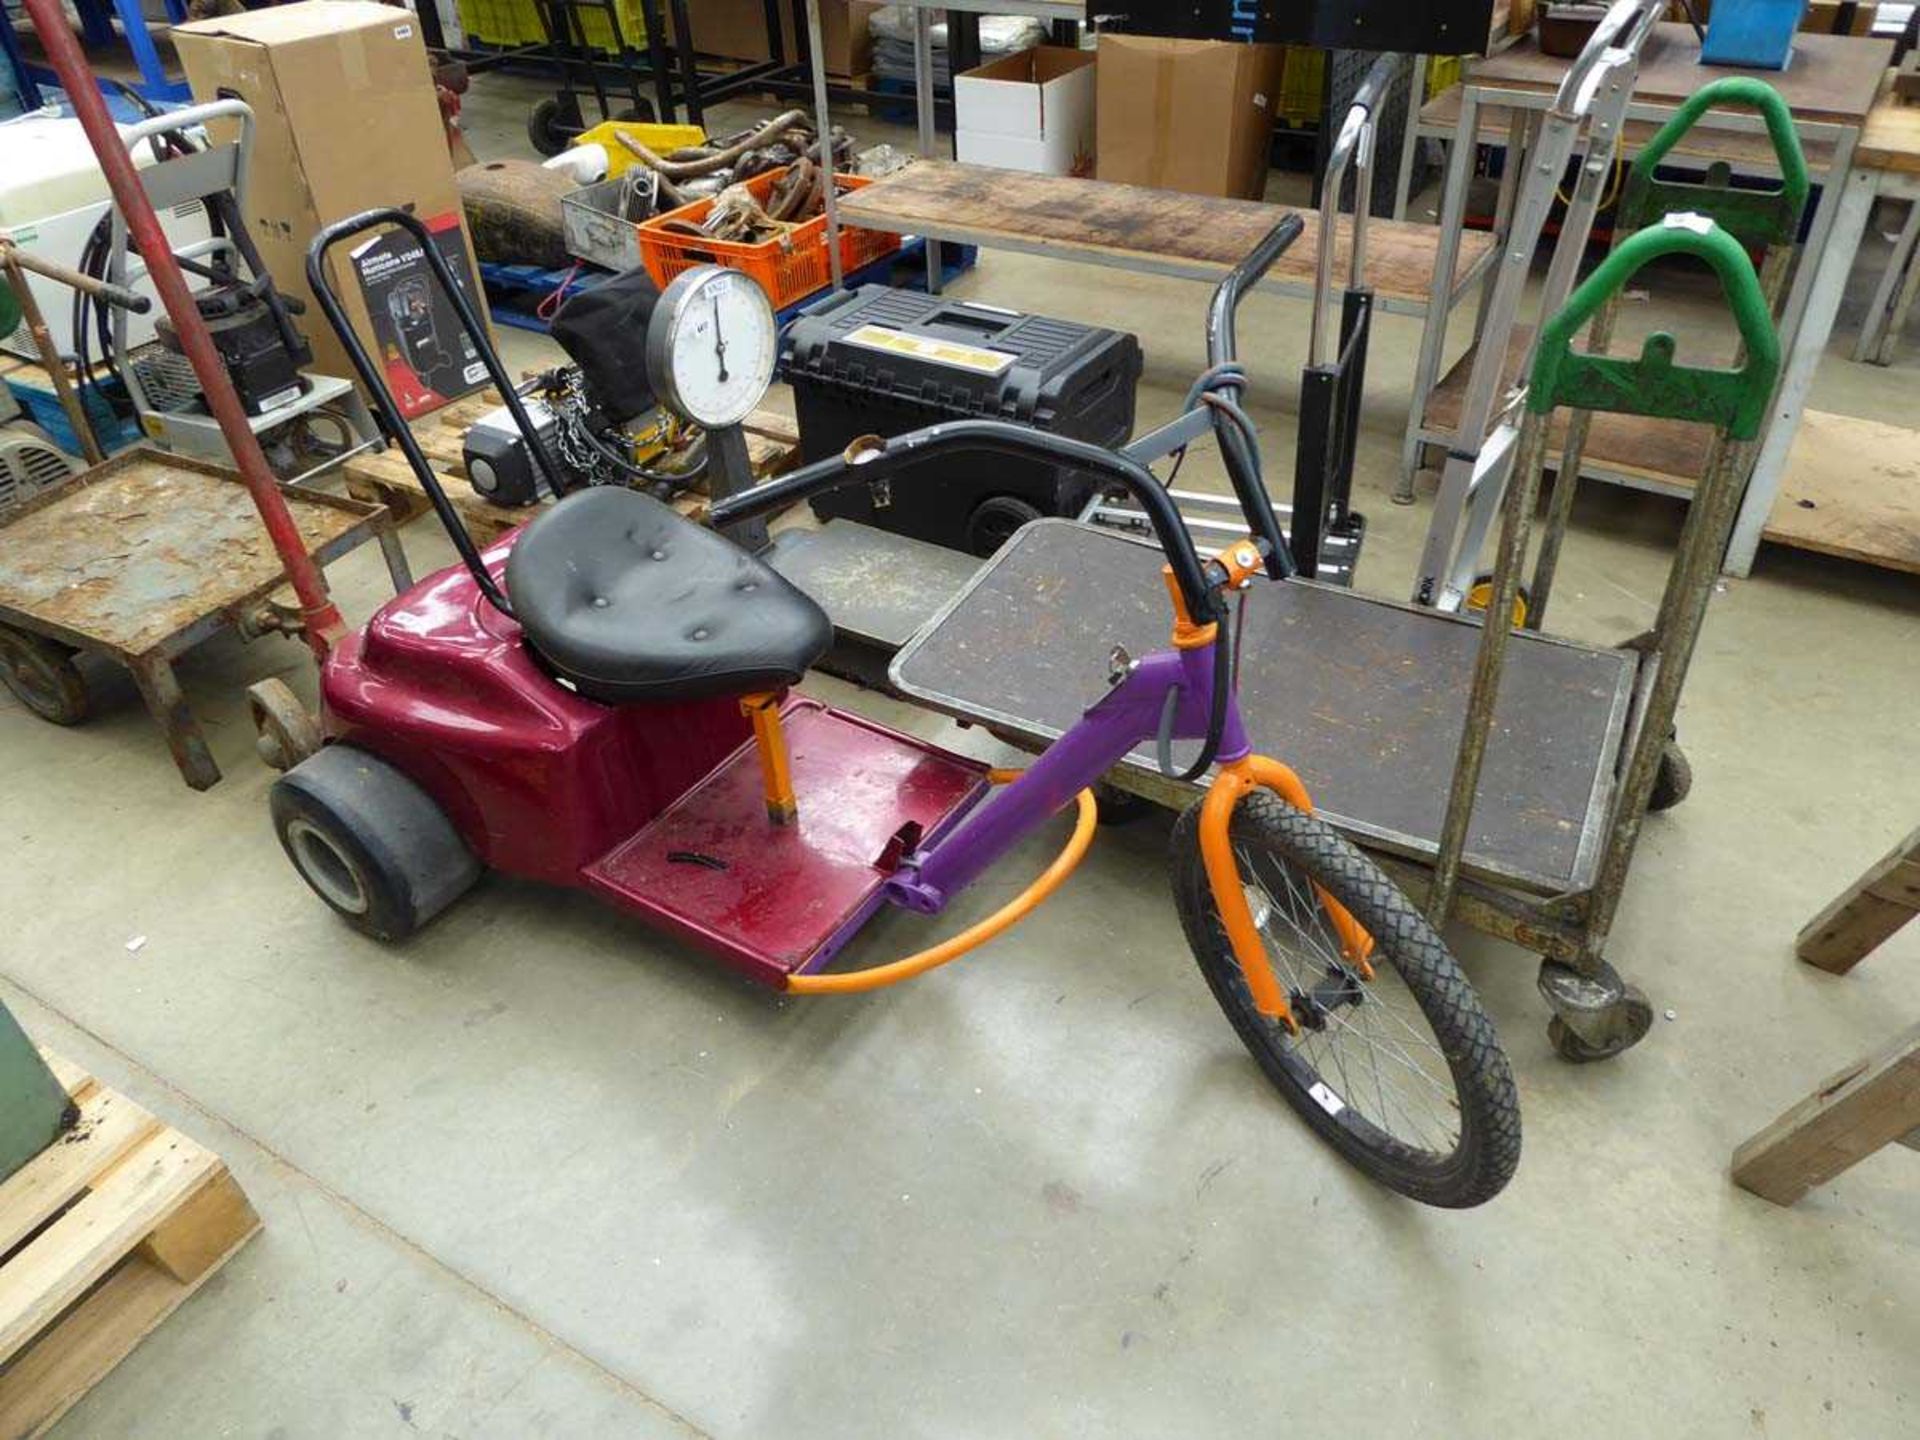 3-wheel converted mobility scooter